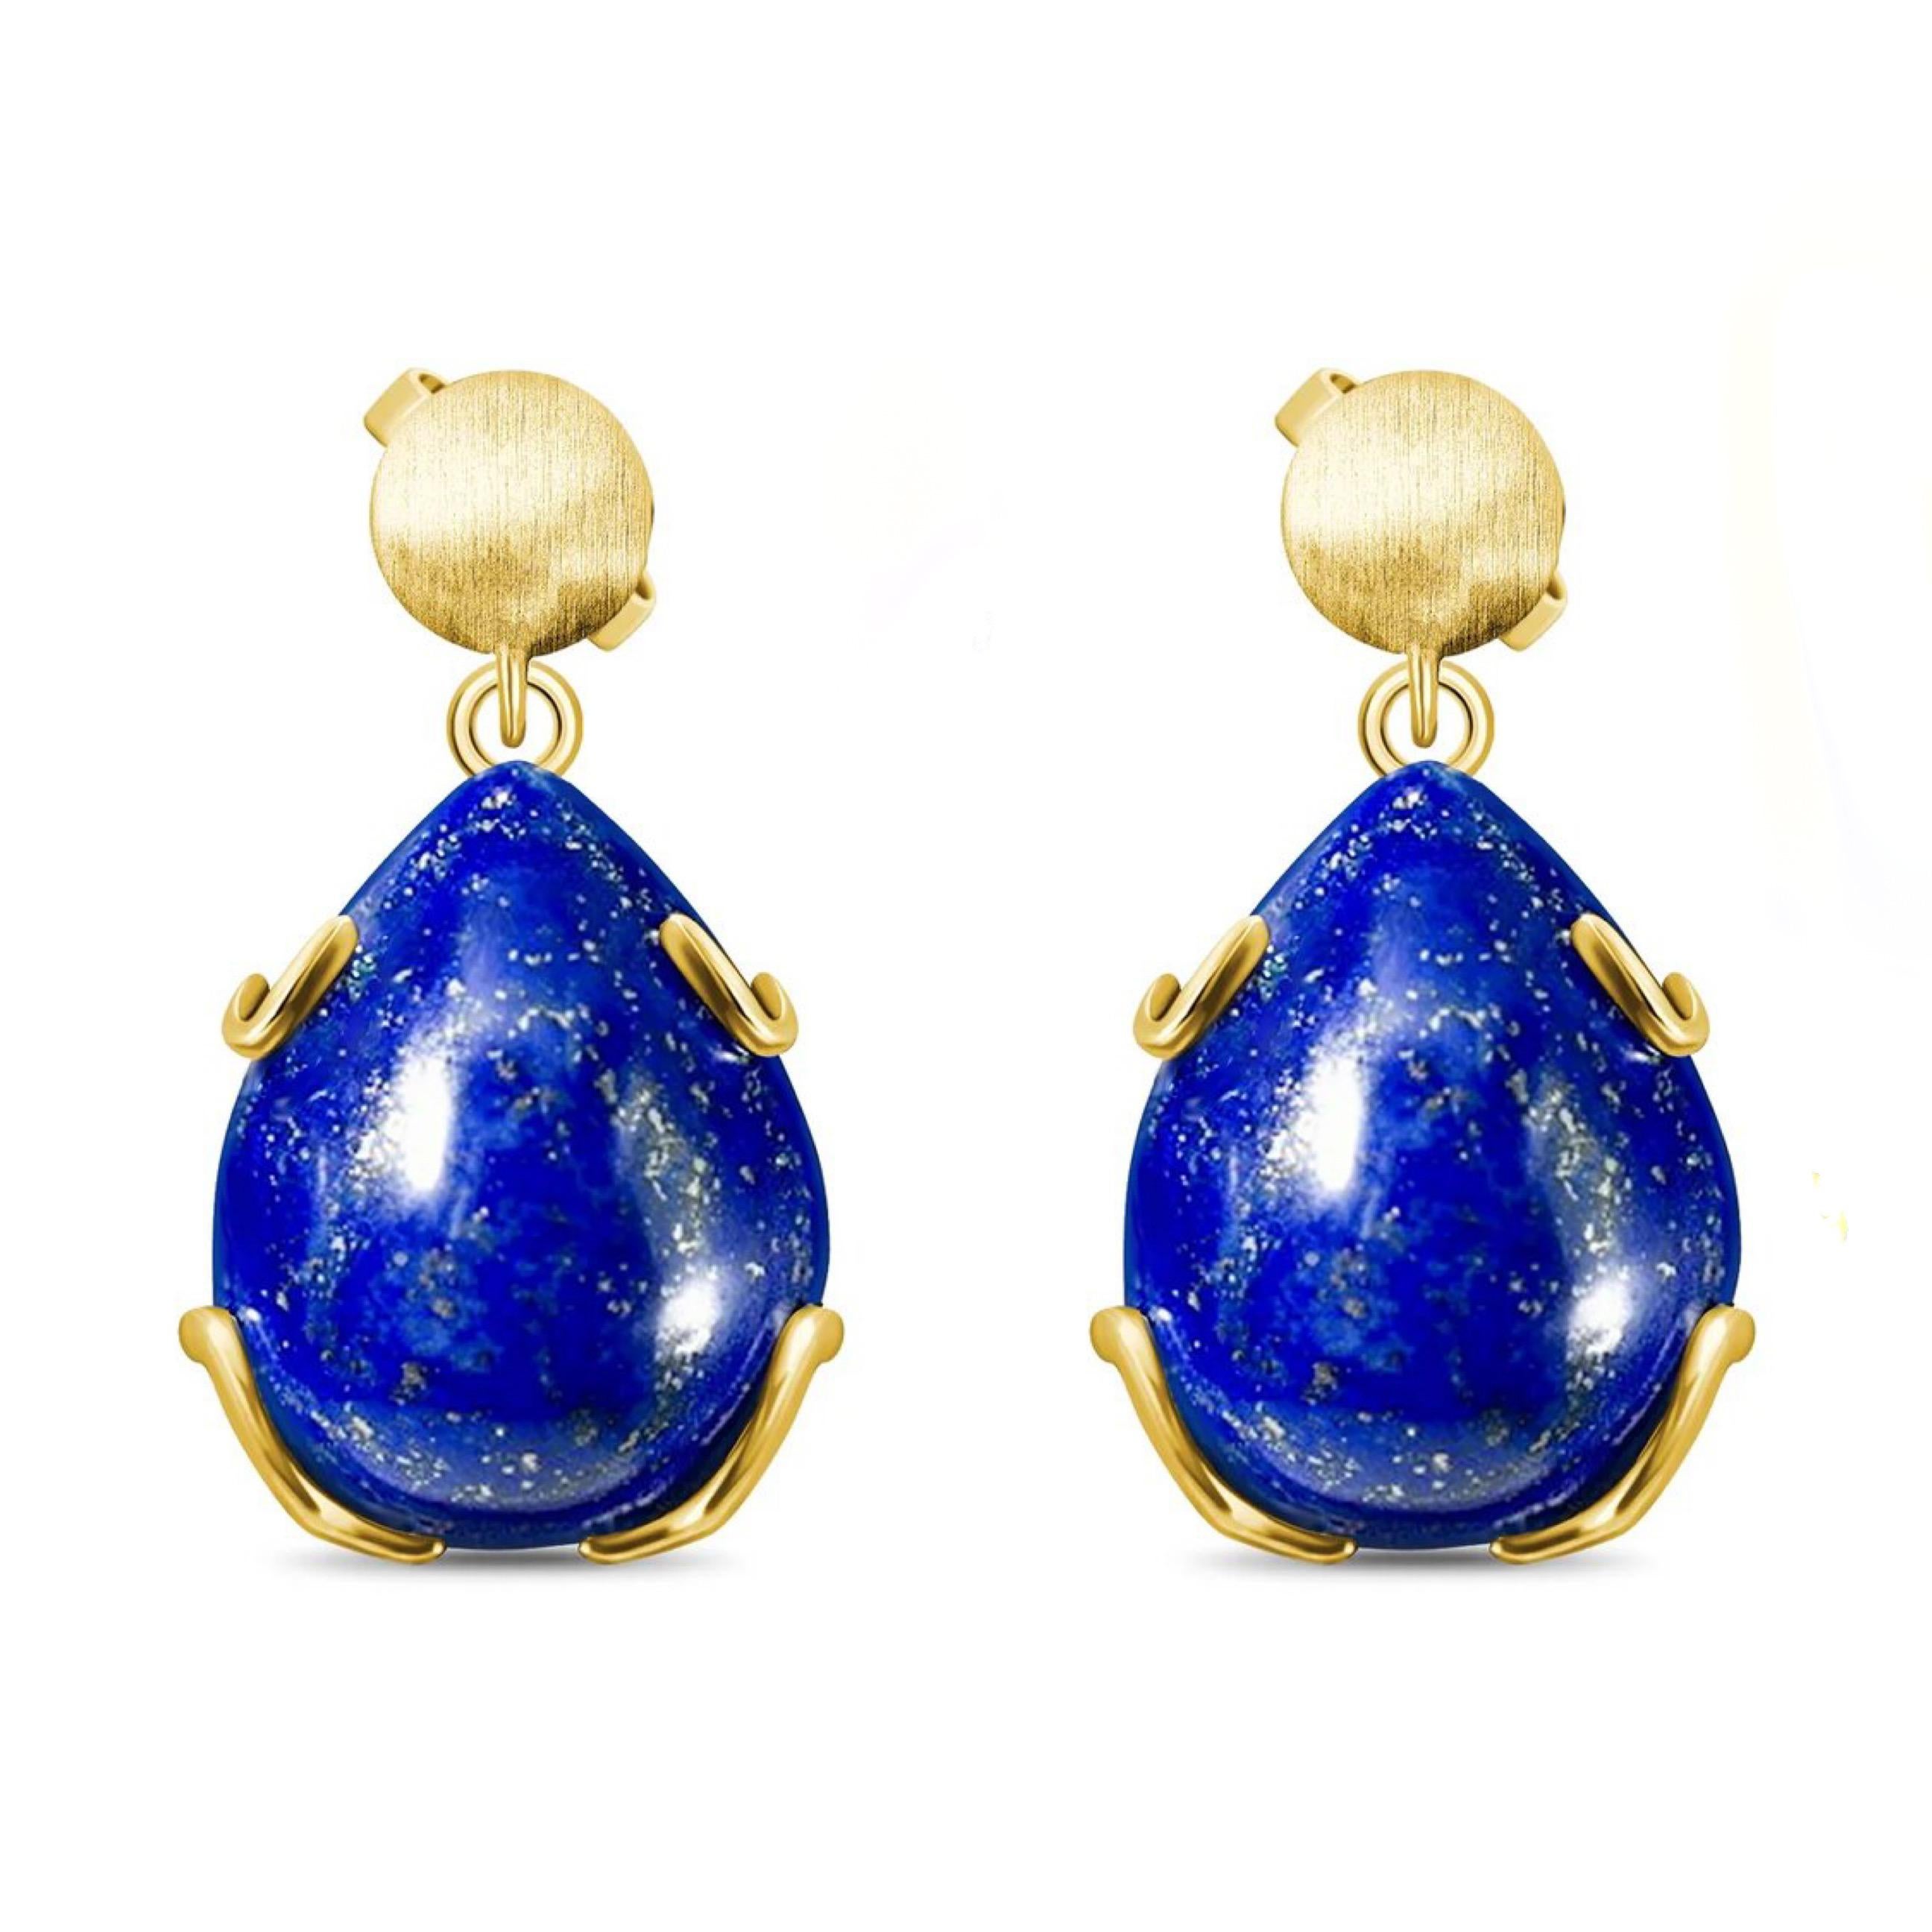 Lapis lazuli is a material known from ancient times. 
In Egypt lapis lazuli was called 